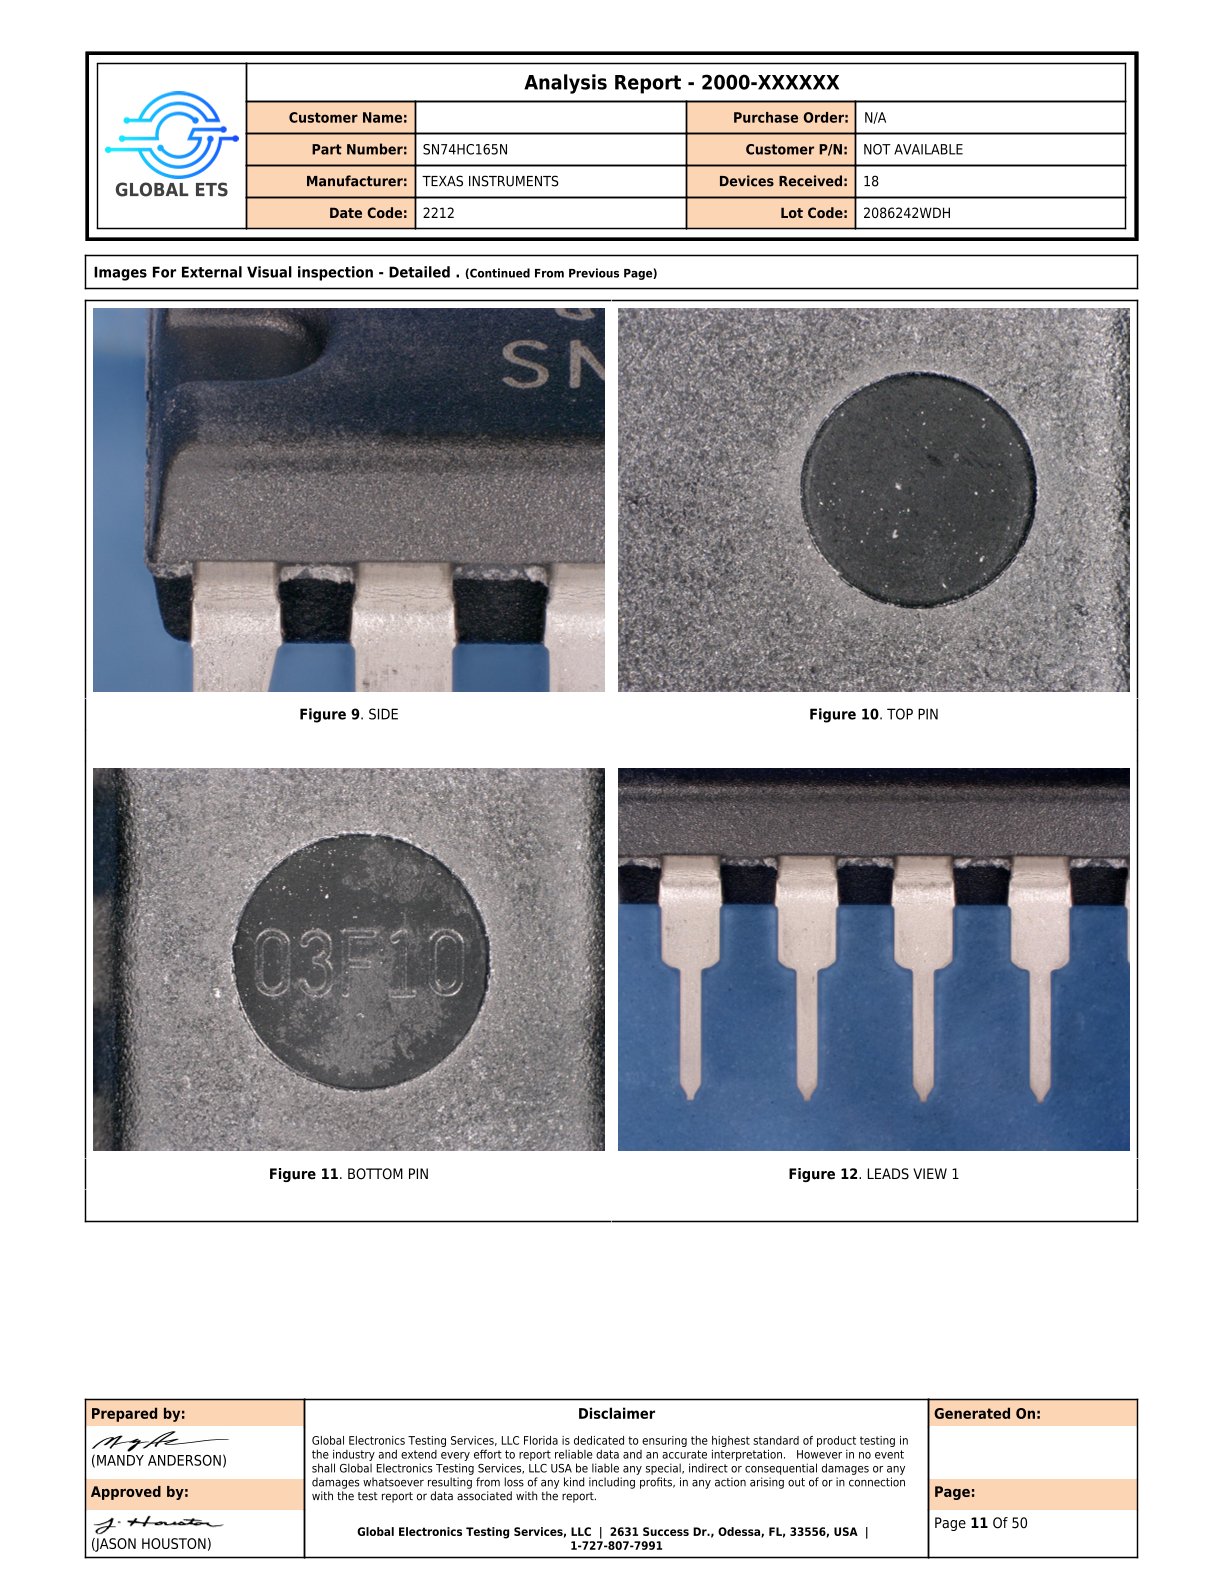 Part of a Global ETS Analysis Report for external visual inspection of a Texas Instruments electronic component are detailed, showing side view, top pin, bottom pin, and leads view.